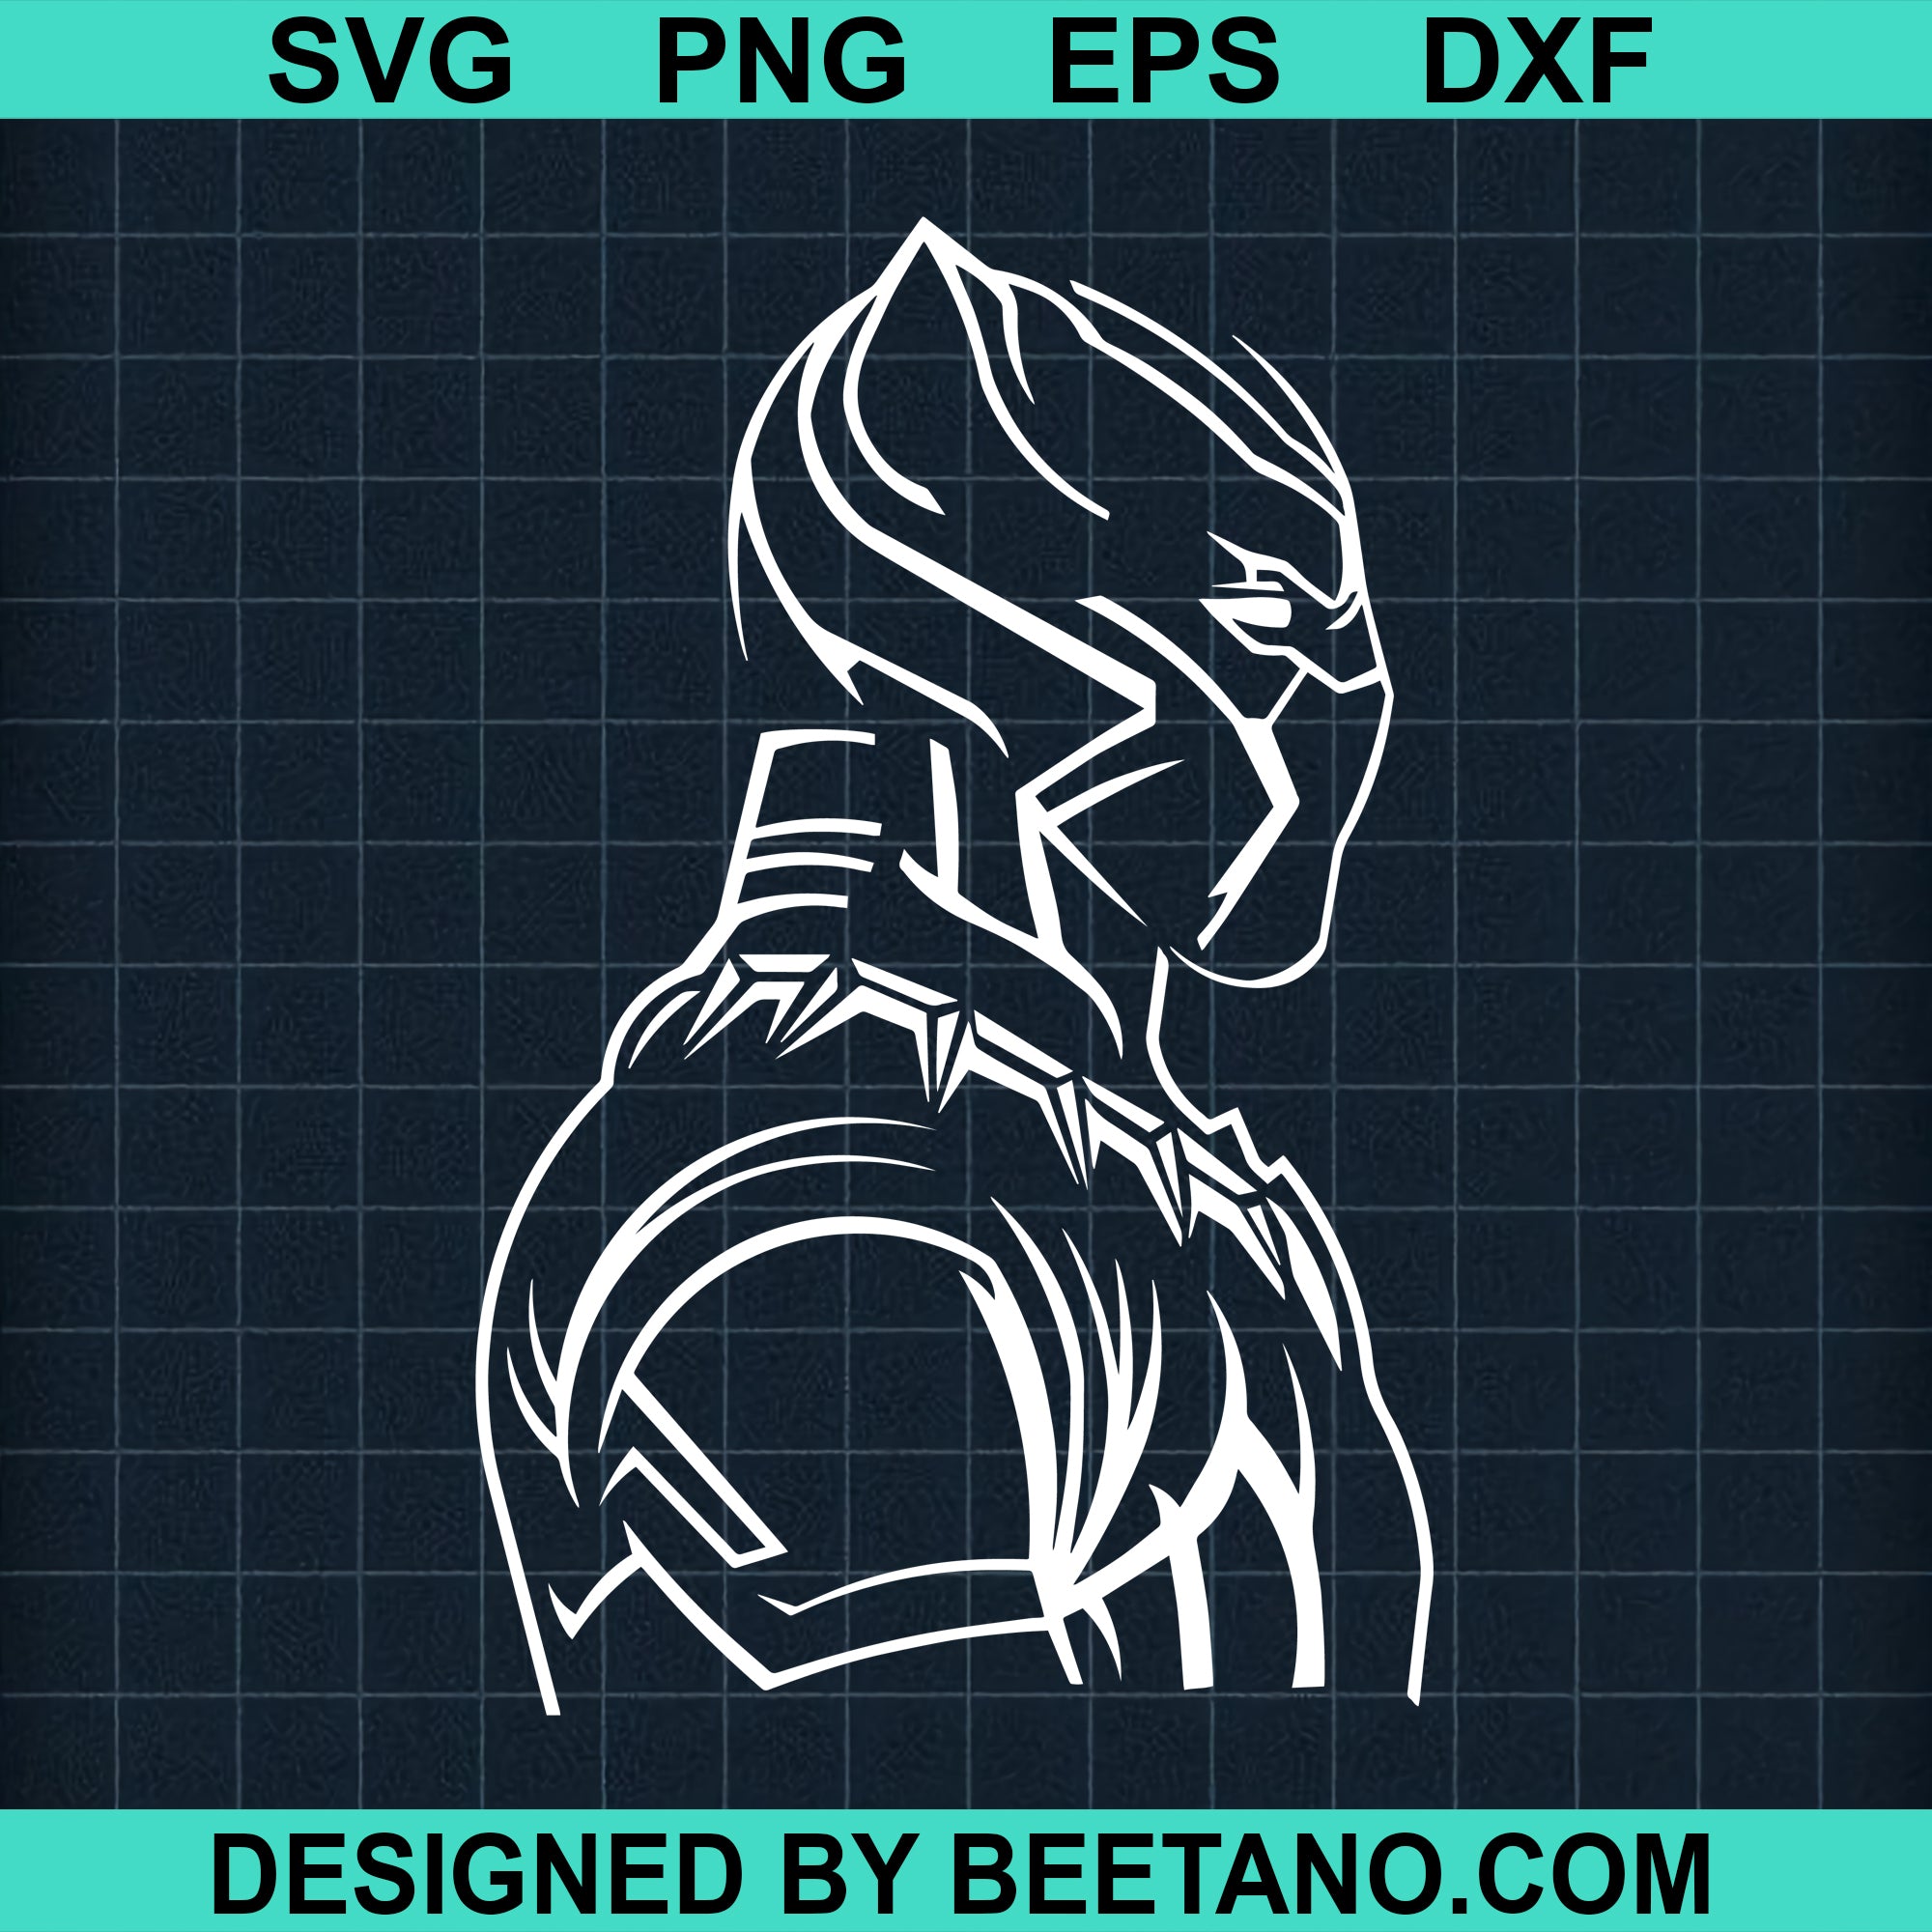 Download Black Panther Chadwick Boseman Svg Cut File For Cricut Machine Make Cr Beetanosvg Scalable Vector Graphics